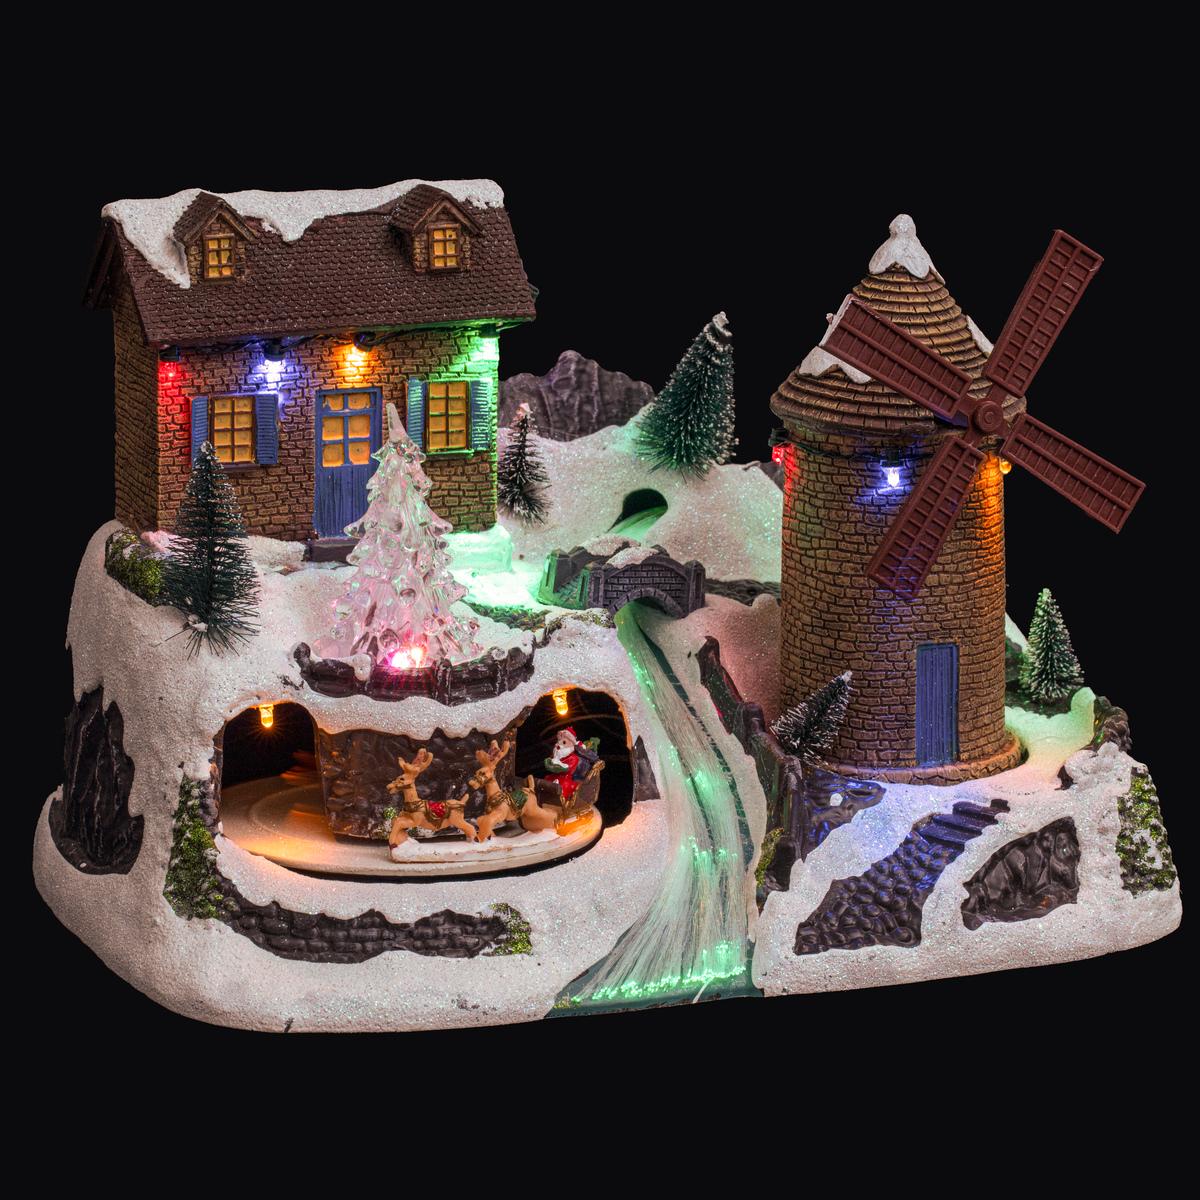 Illuminated Christmas Village, Windmill - Deco, Furniture for Professionals  - Decoration Brands